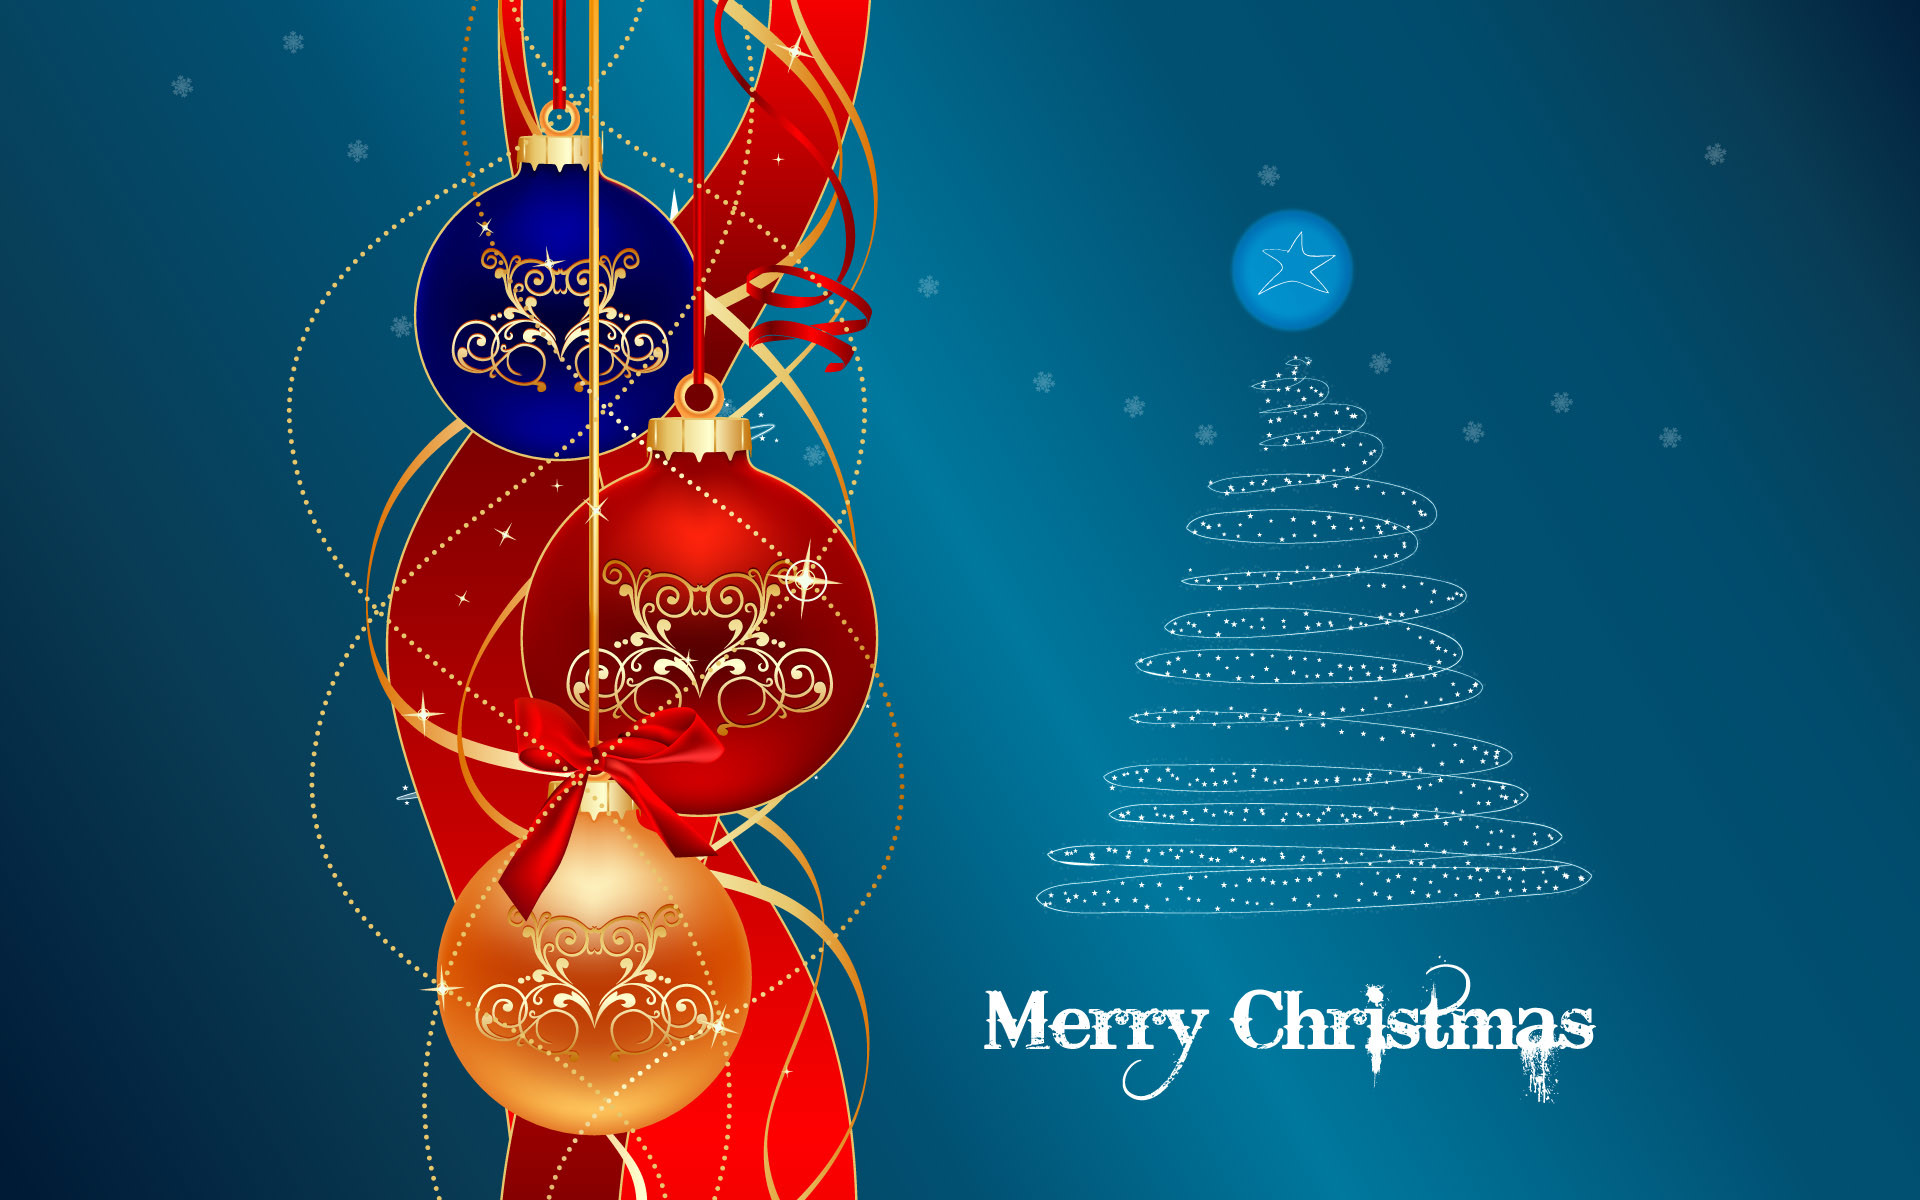 Cute Merry Christmas background Full HD 1080p Wallpapers PIXHOME